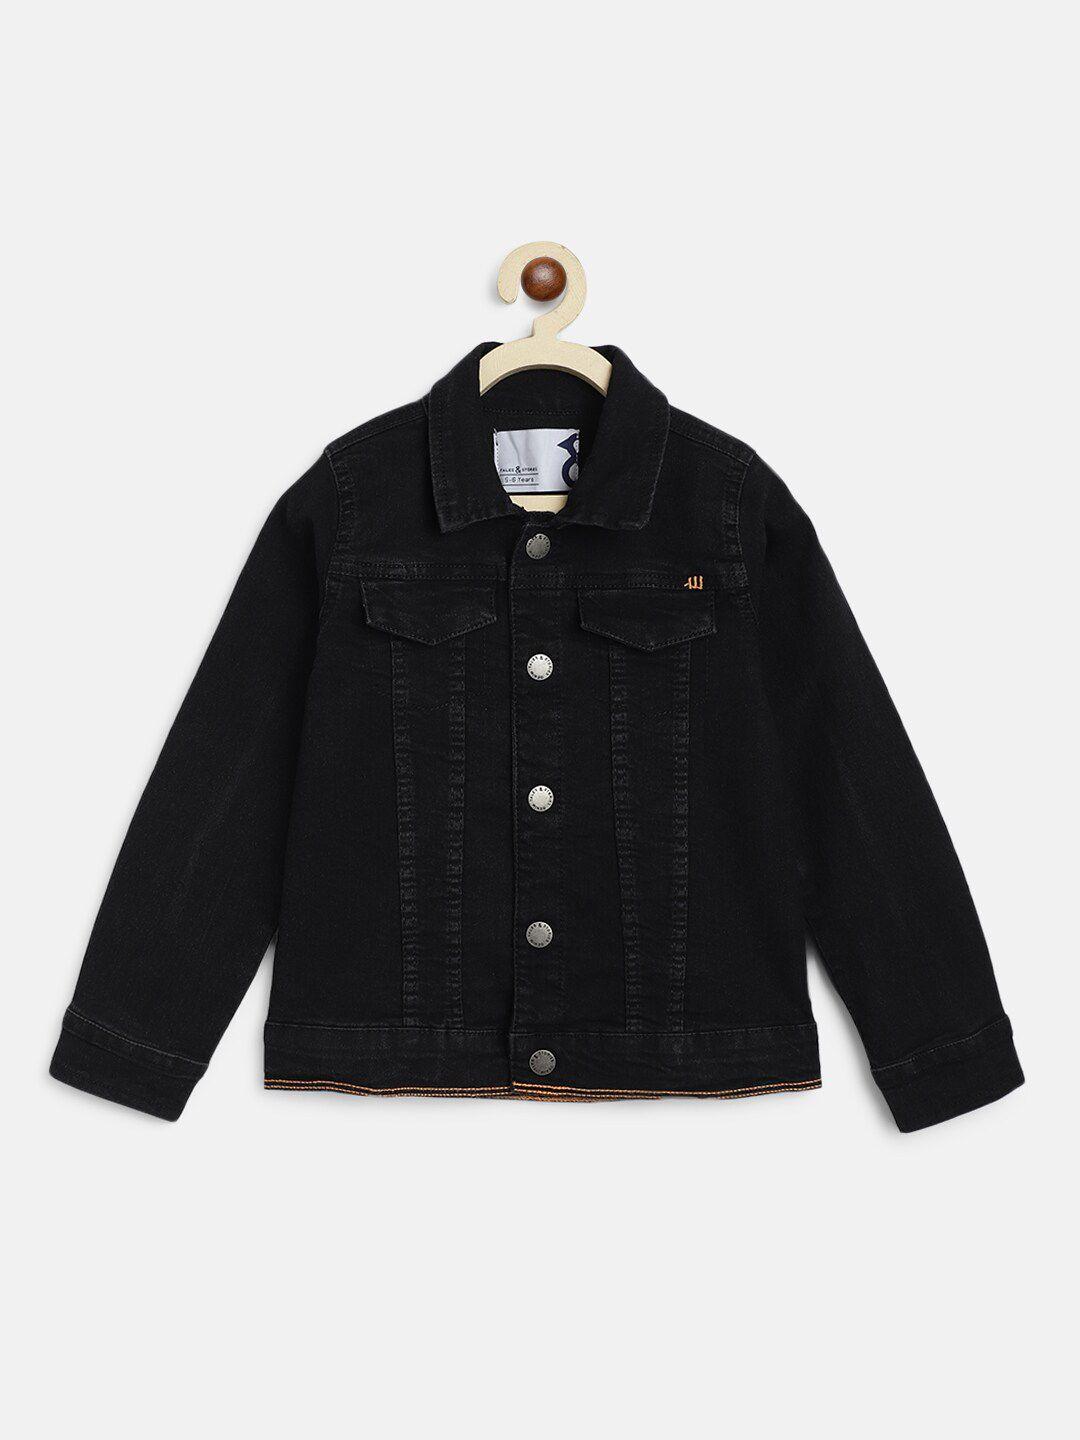 tales & stories boys black lightweight denim jacket with embroidered